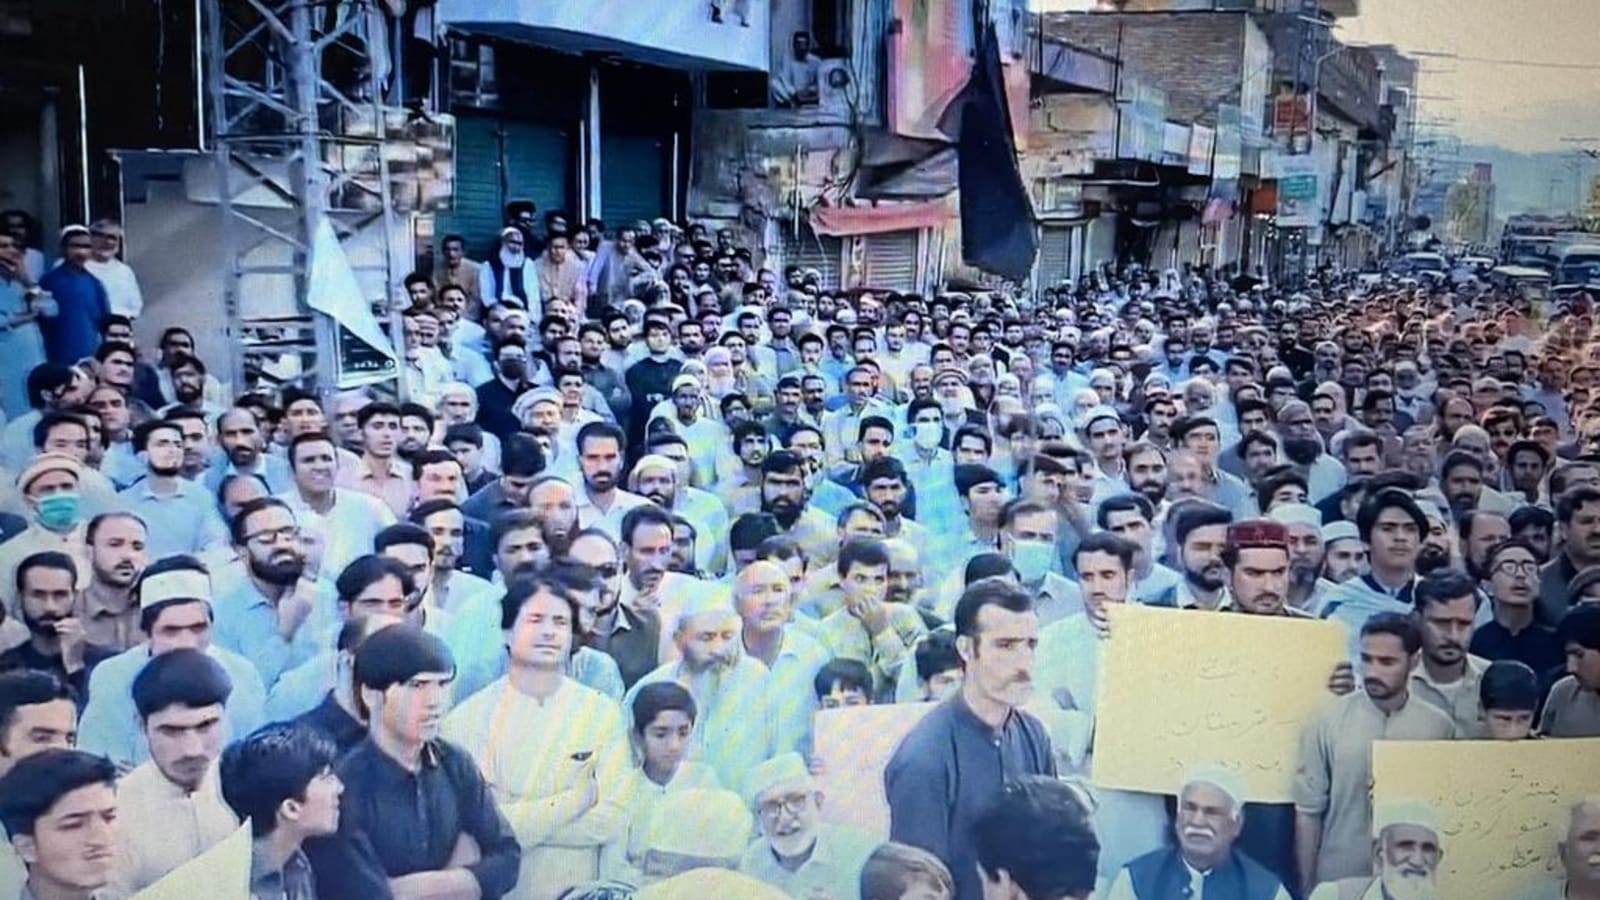 pak-govt-red-faced-as-residents-stage-anti-terror-protest-in-swat-valley-report